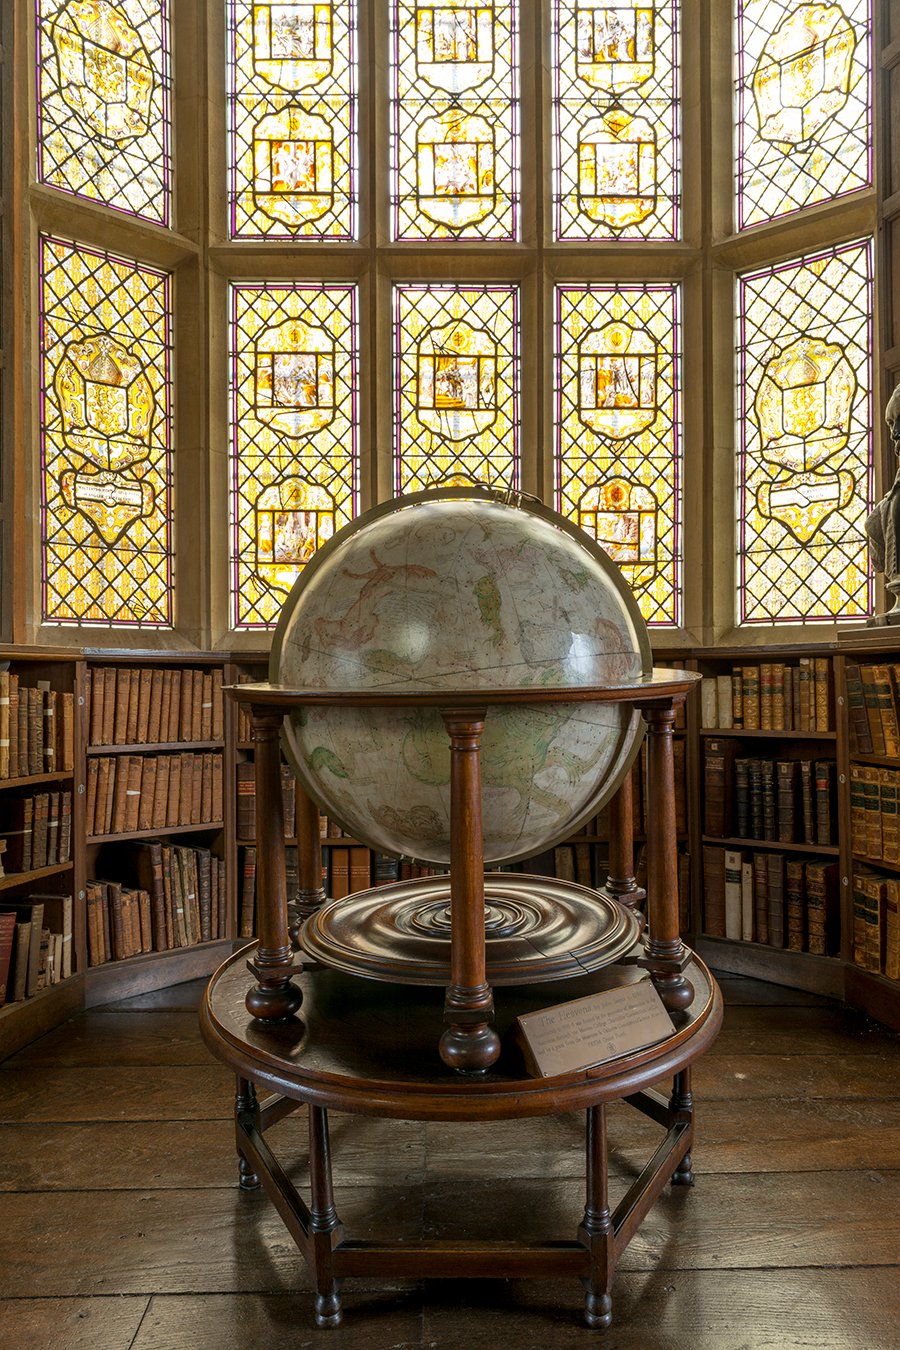 One of the globes in the Upper Library